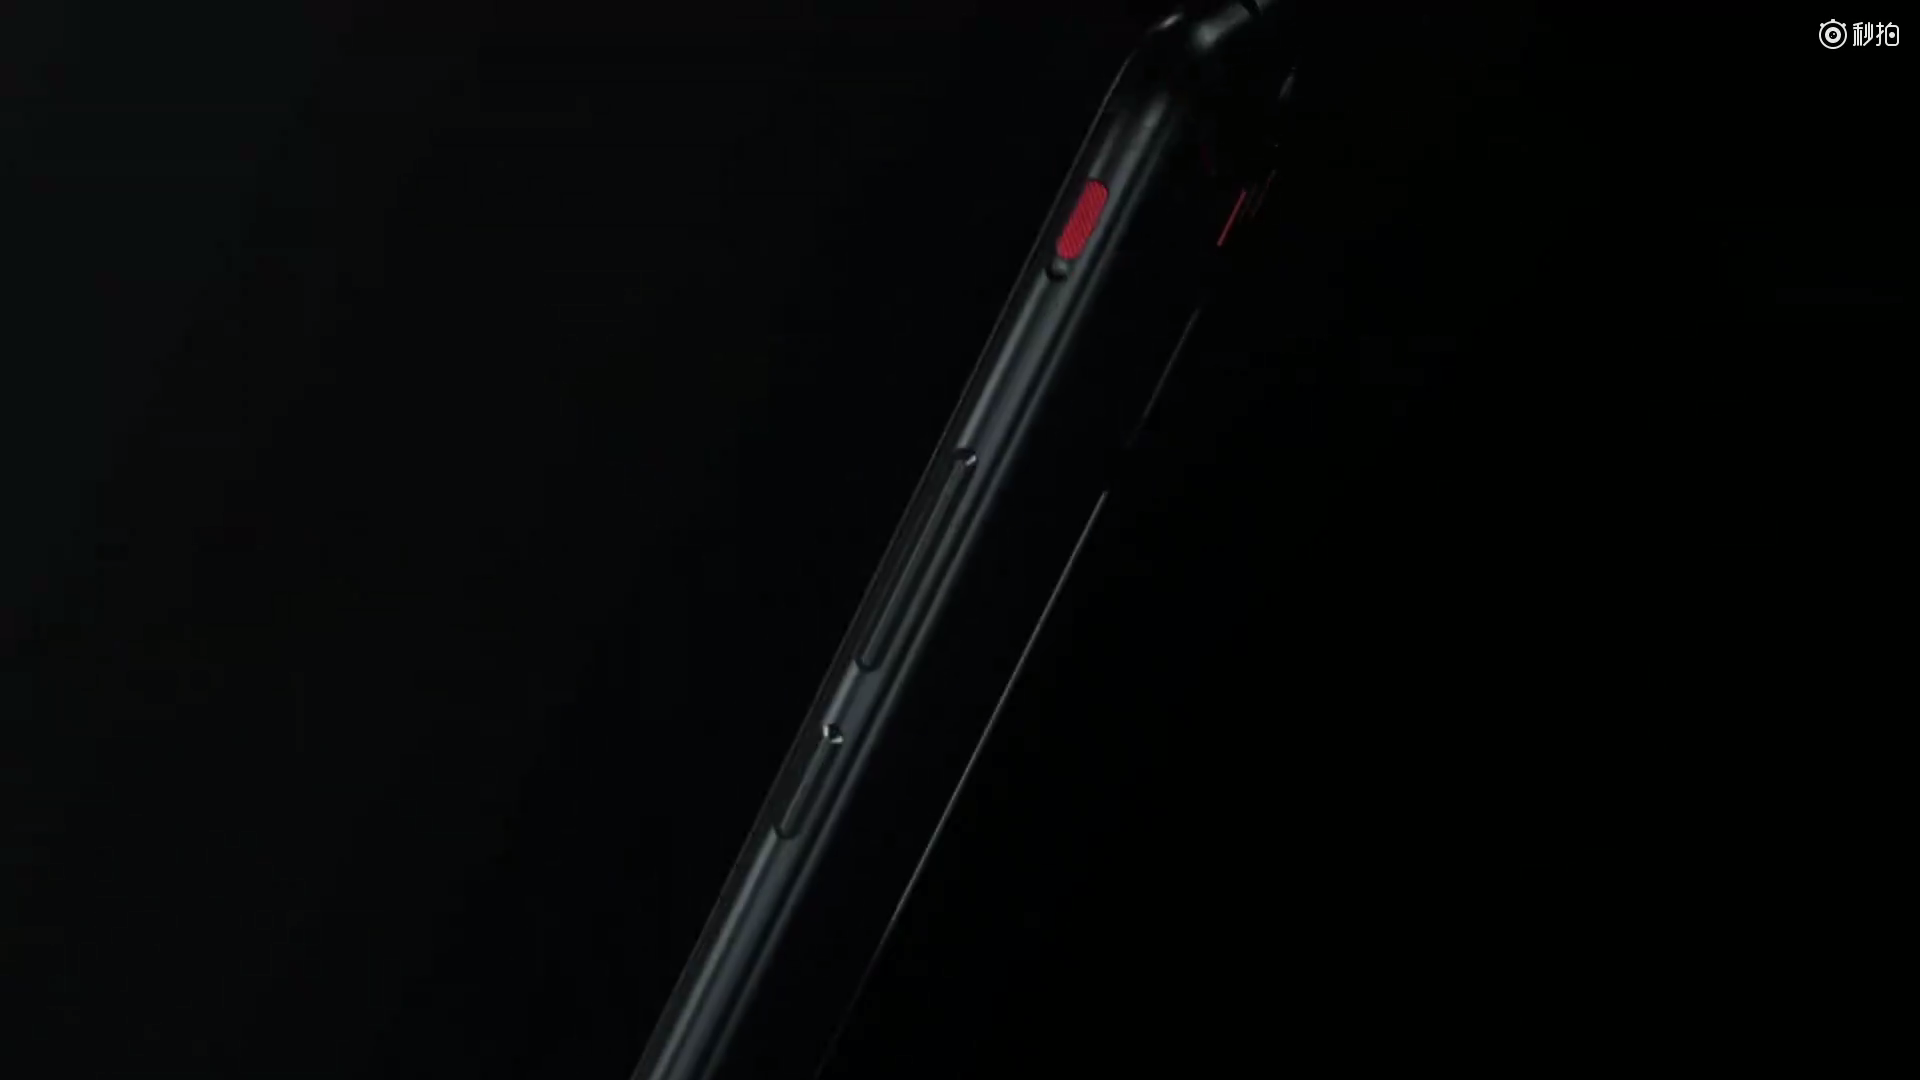 Teaser hints Nubia Red Magic gaming smartphone launch on April 19 4